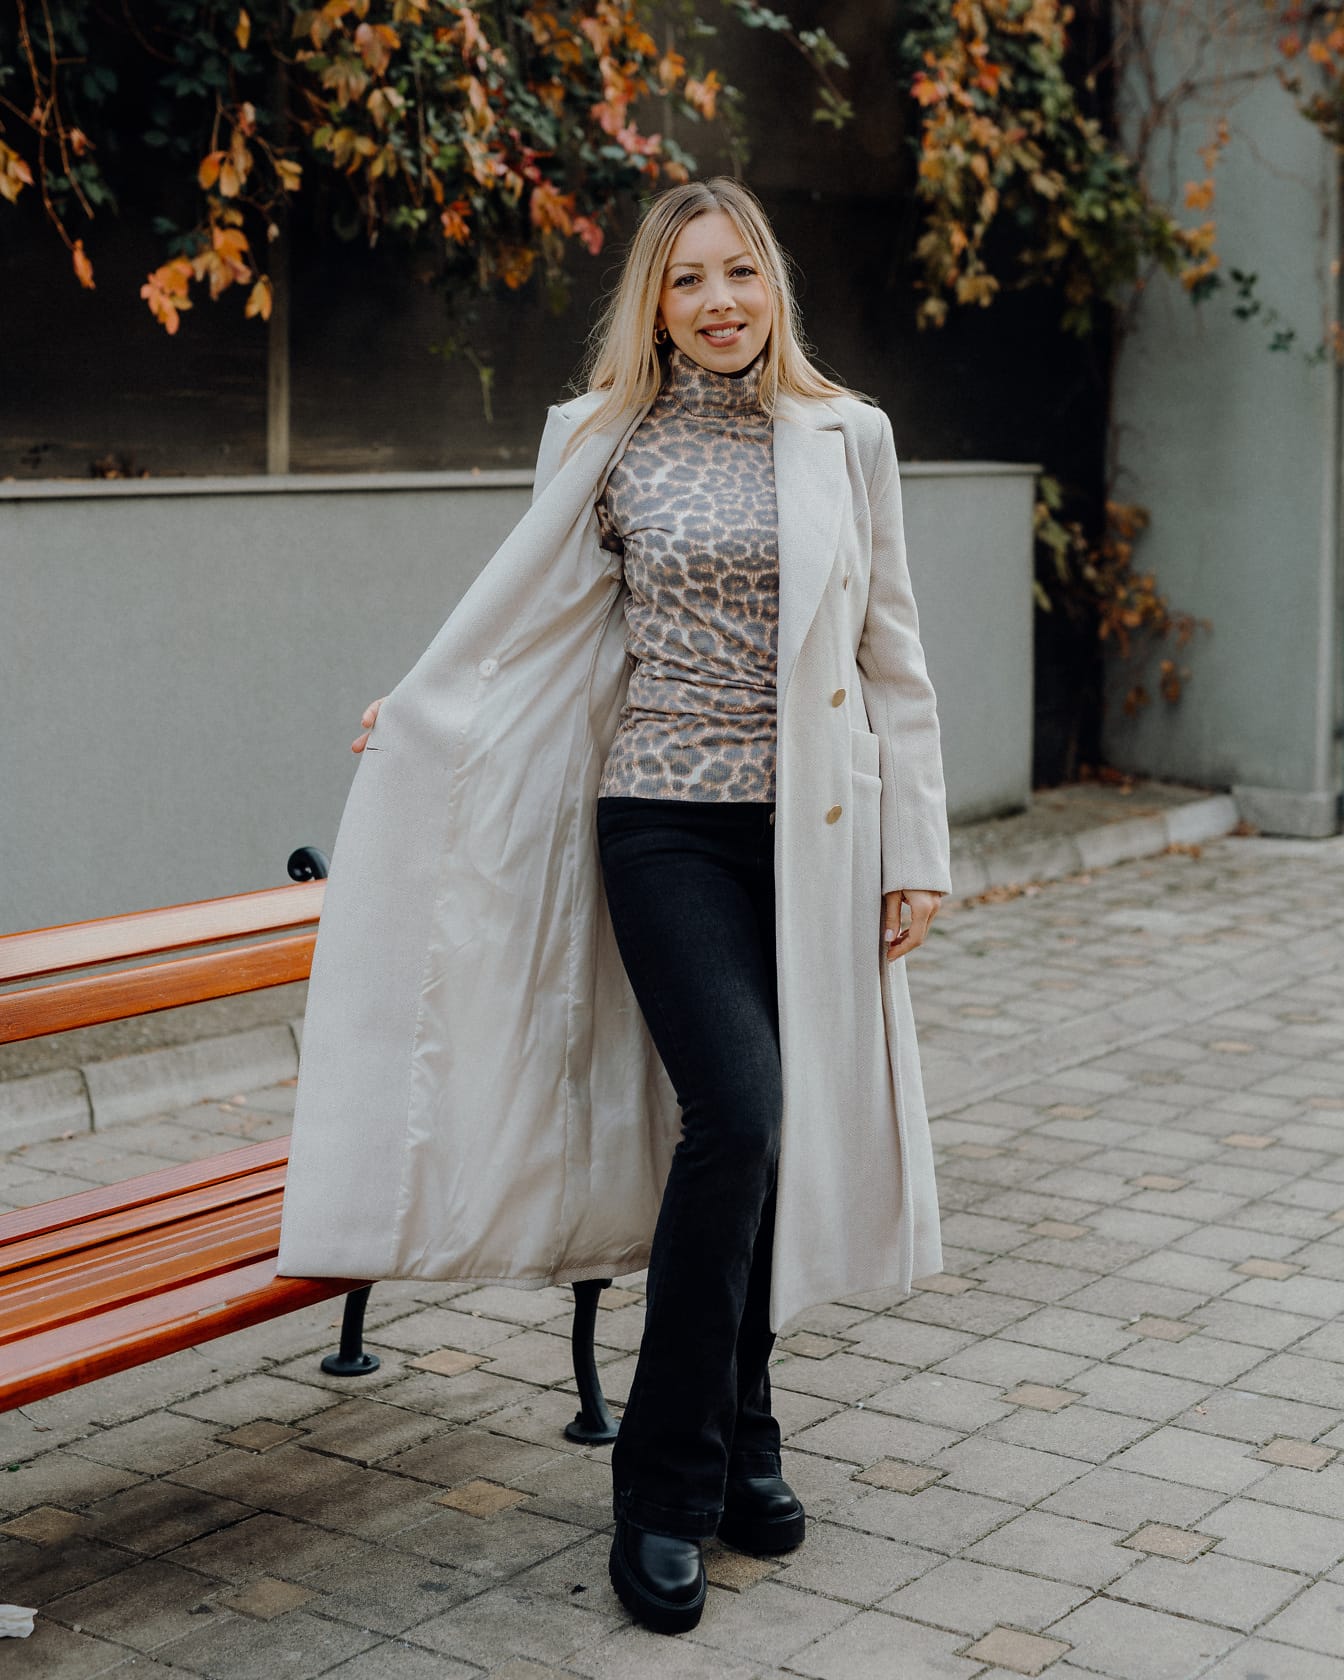 Blonde posing in beige coat and black pants and boots